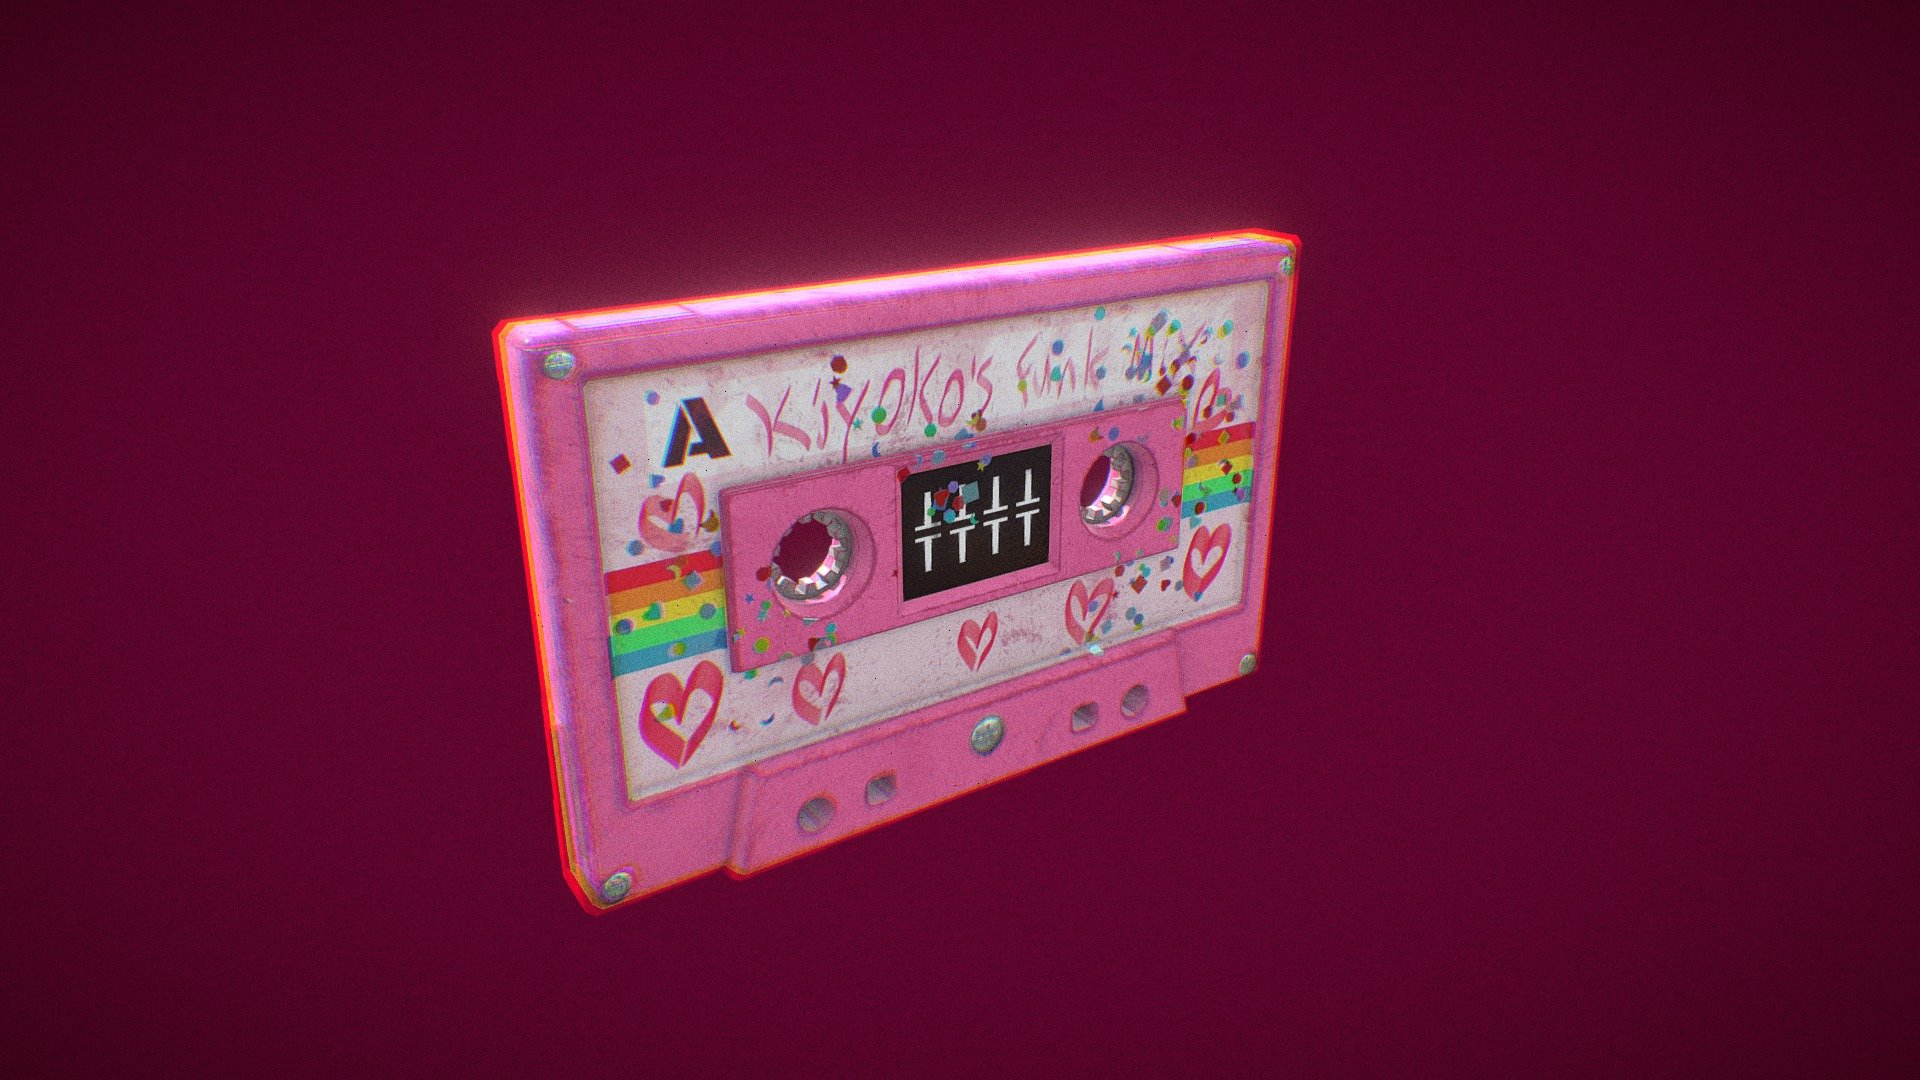 This is a piece made for a portfolio class. It is a cassette tape, shared by two characters who use the A side and B side of the cassette for their own mixes, inspired by games like Jet Set Radio, Hi-Fi Rush, and anything else that has that funk aesthetic 3d model